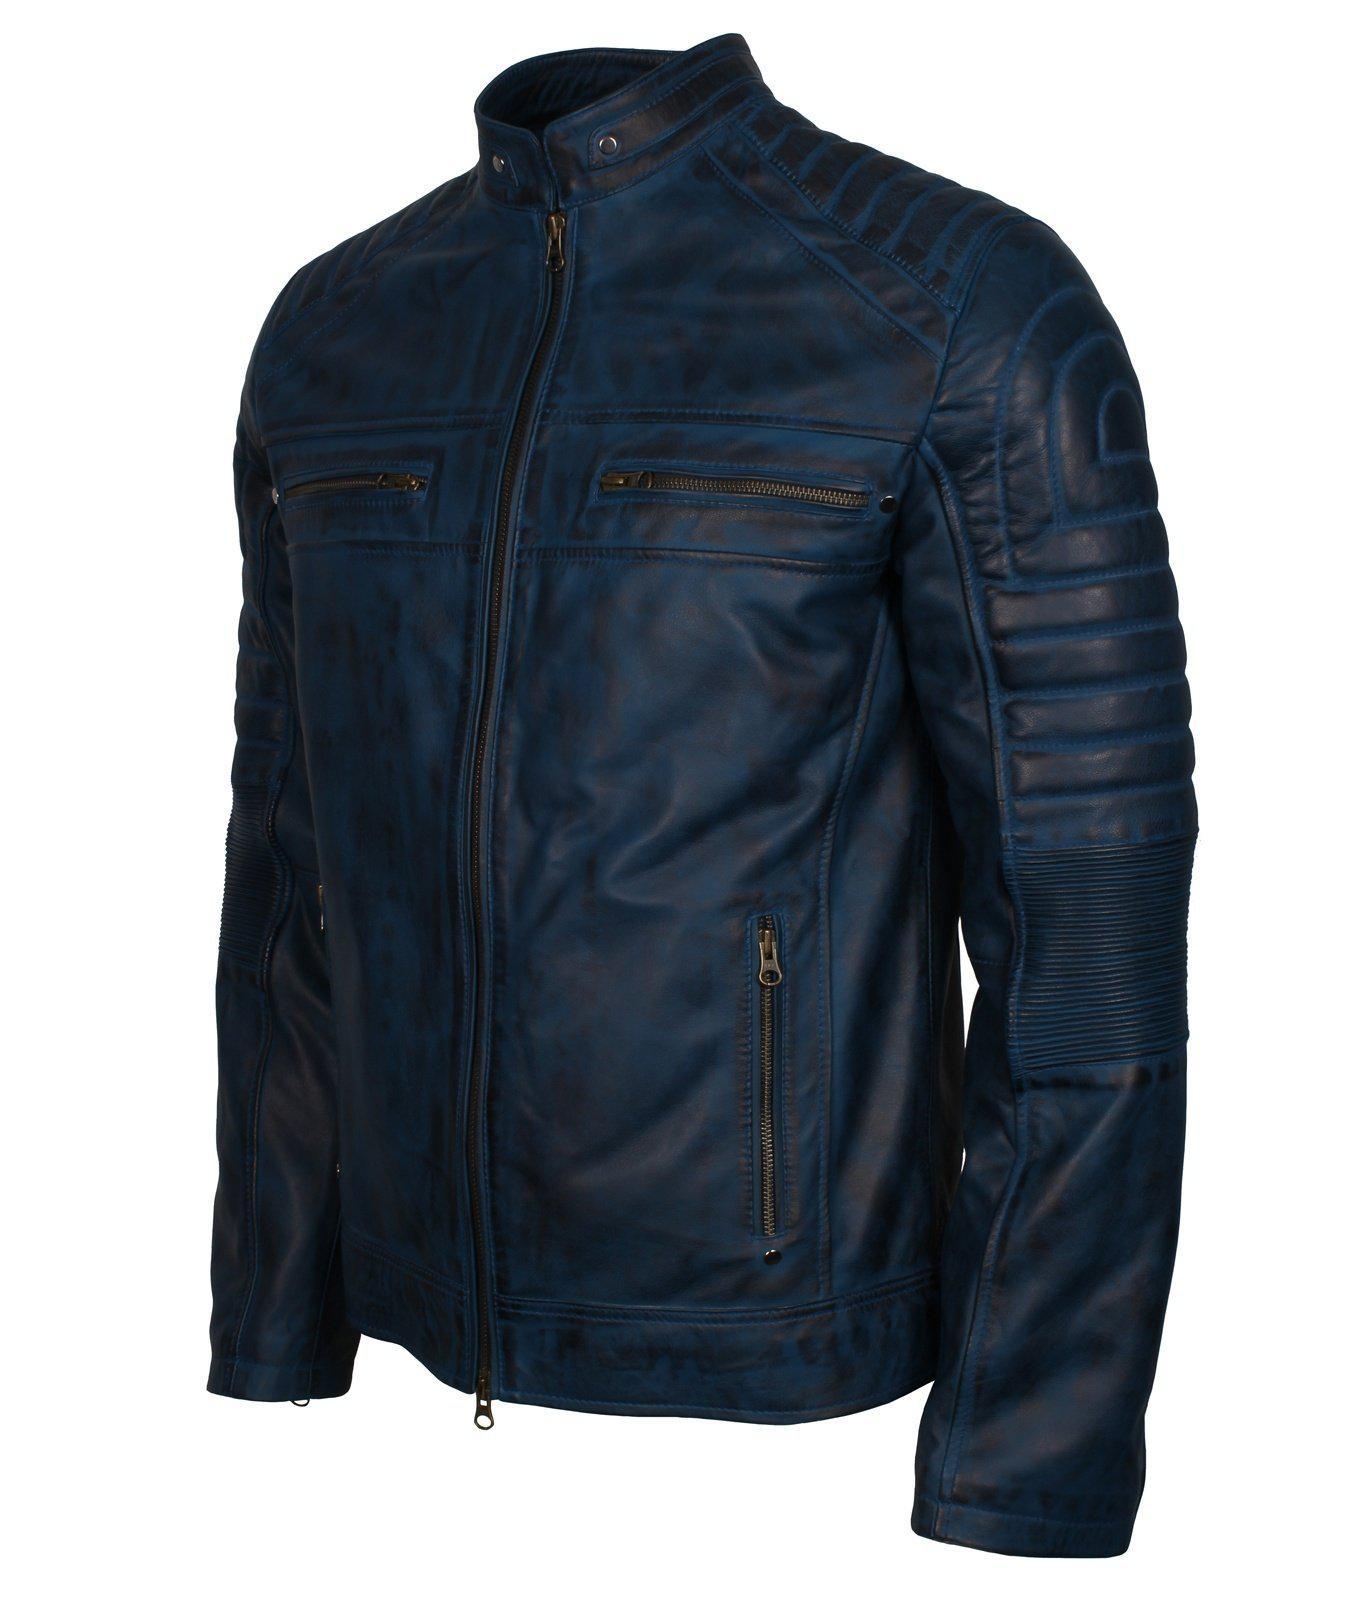 Motorcycle Racing Navy Blue Leather Jacket 